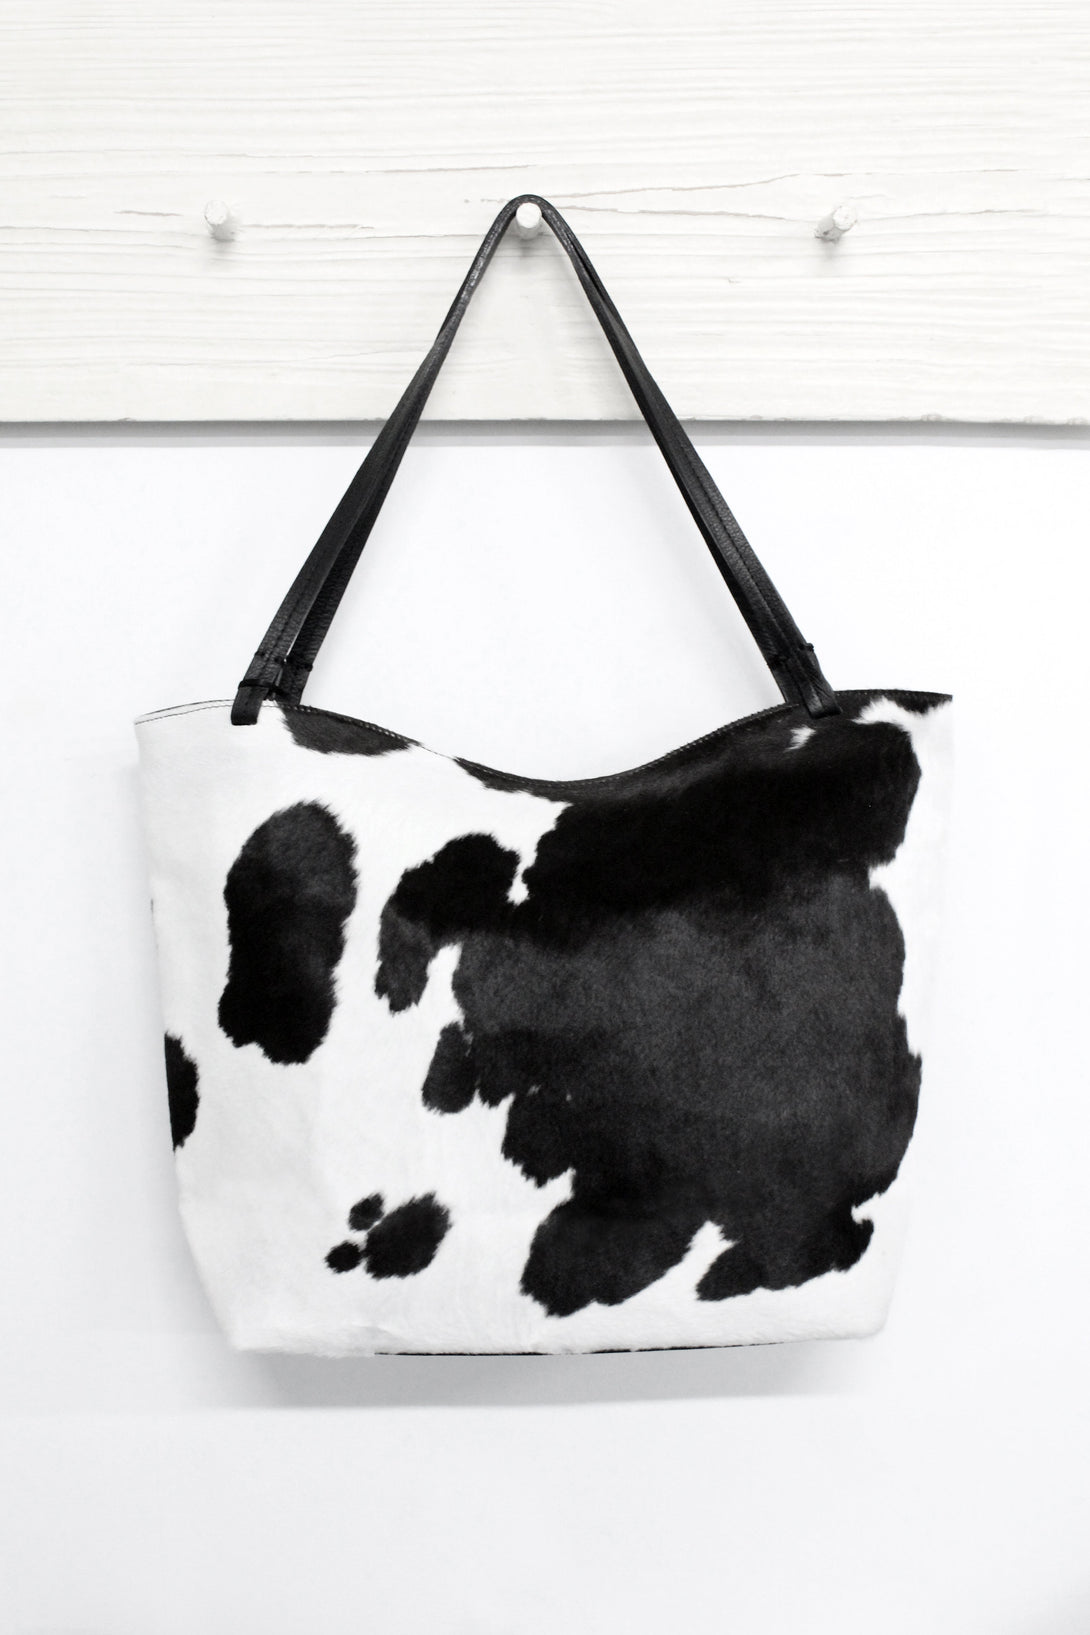 Nora Leather Handbag Black and White Cowhide Leather